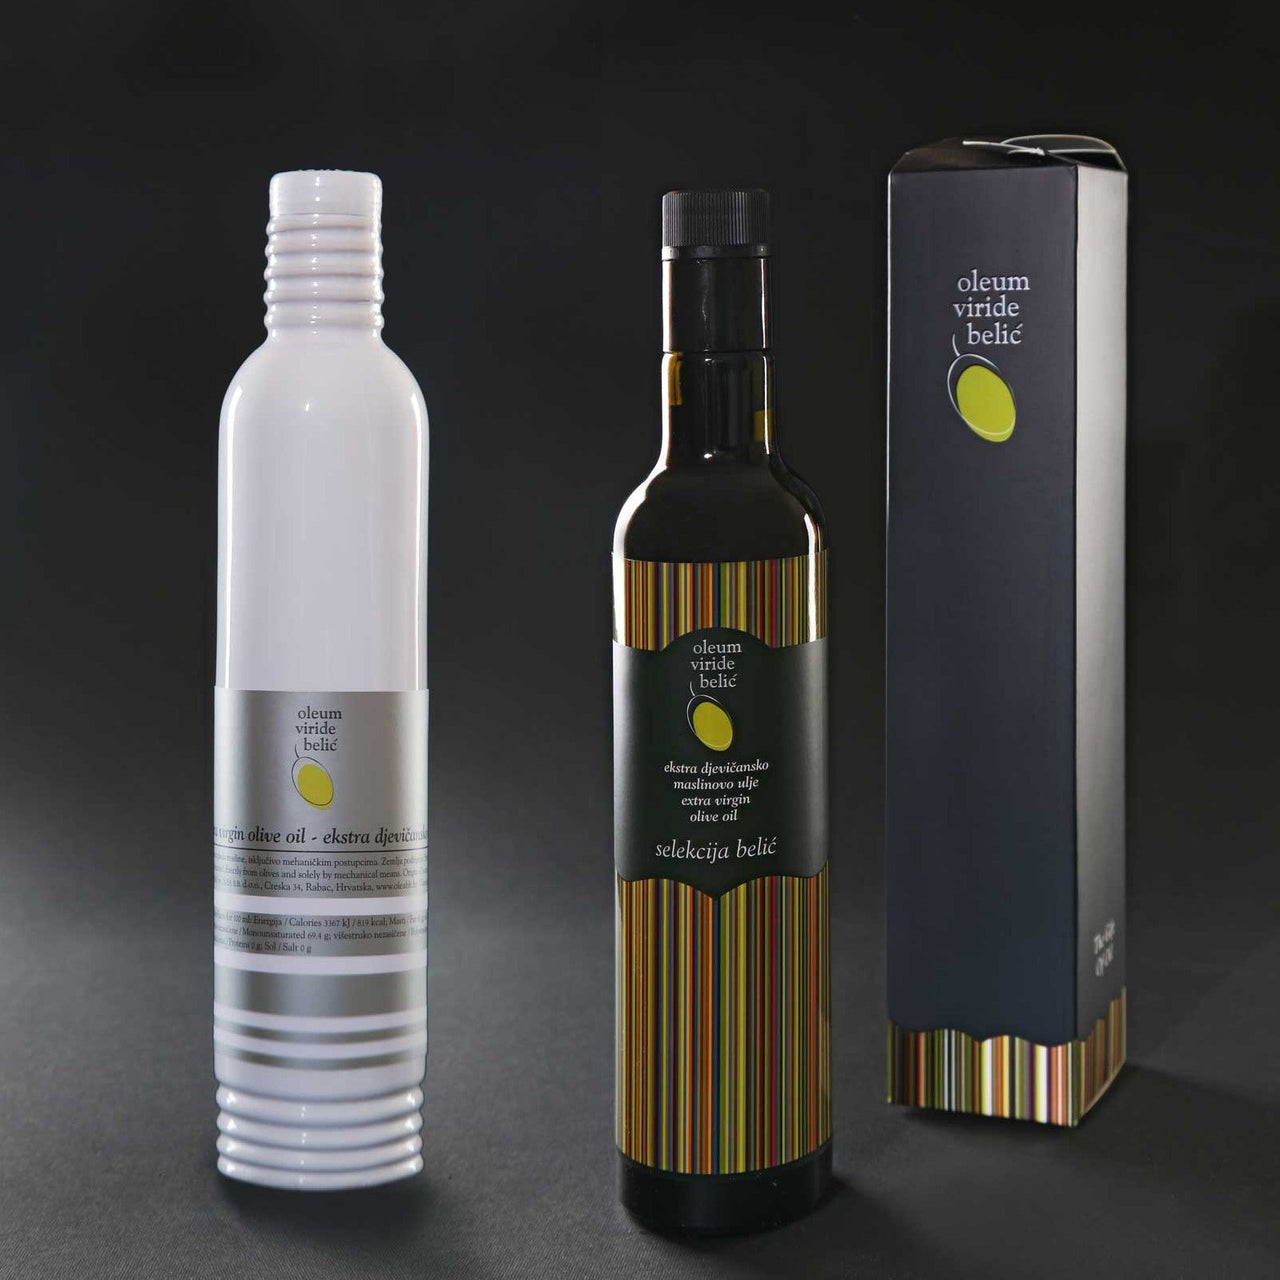 Istria is officially the best region for extra virgin olive oil in the world - for the sixth year in a row! | Marqt.no